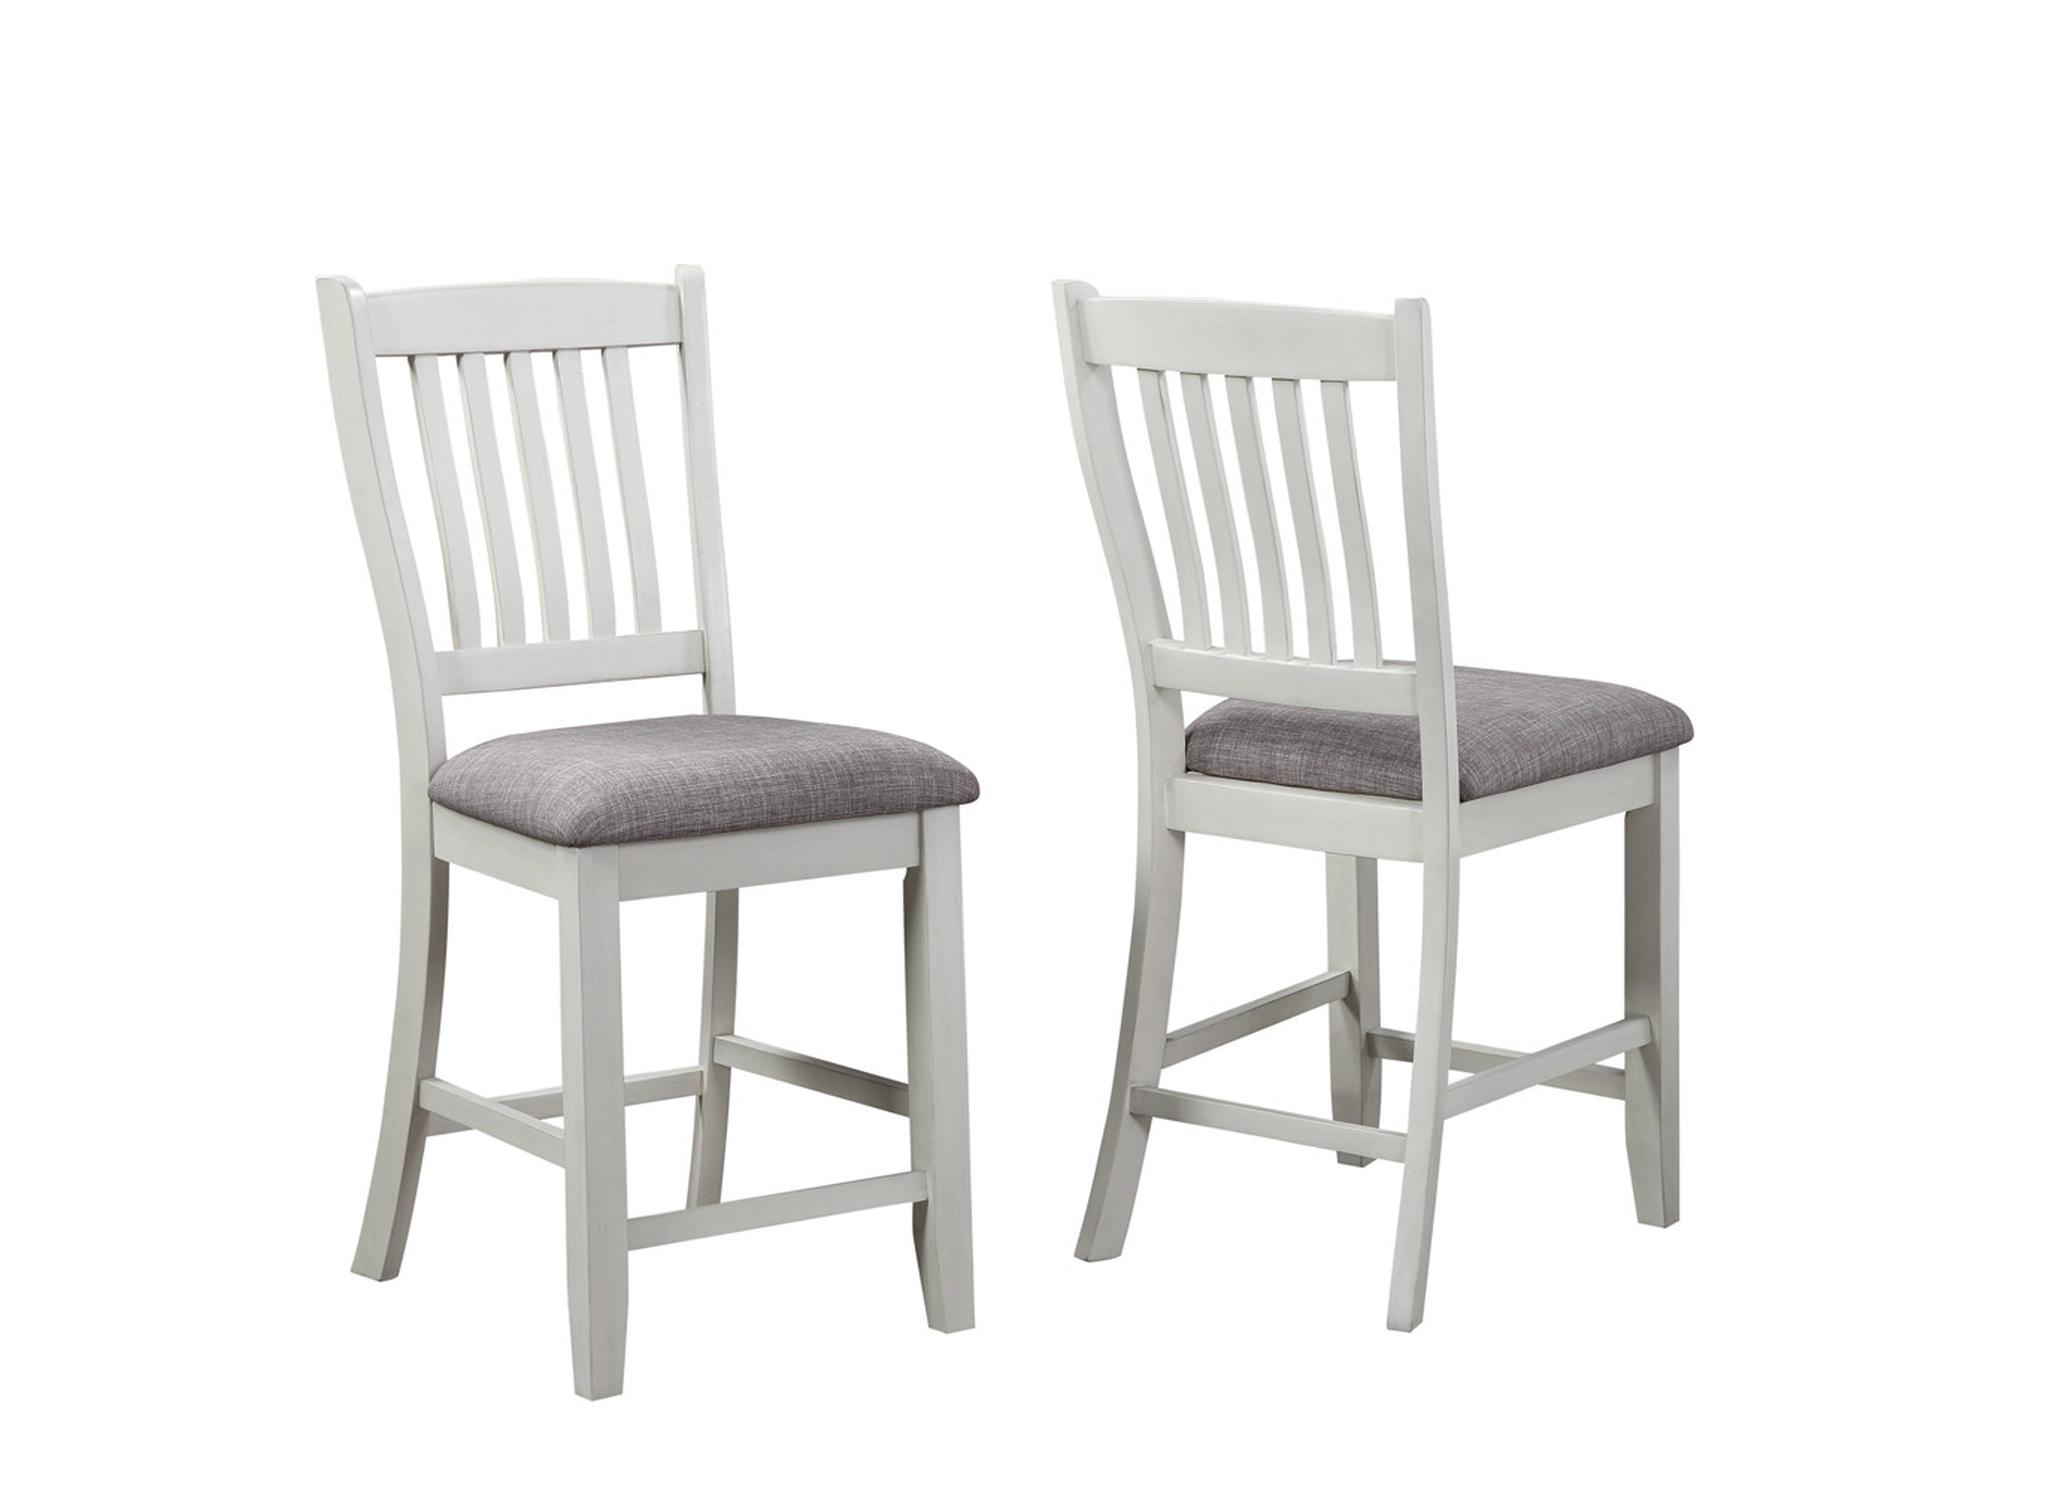 Traditional, Cottage Counter Chair Set Buford 2773CG-S-24-2pcs in White, Gray Linen